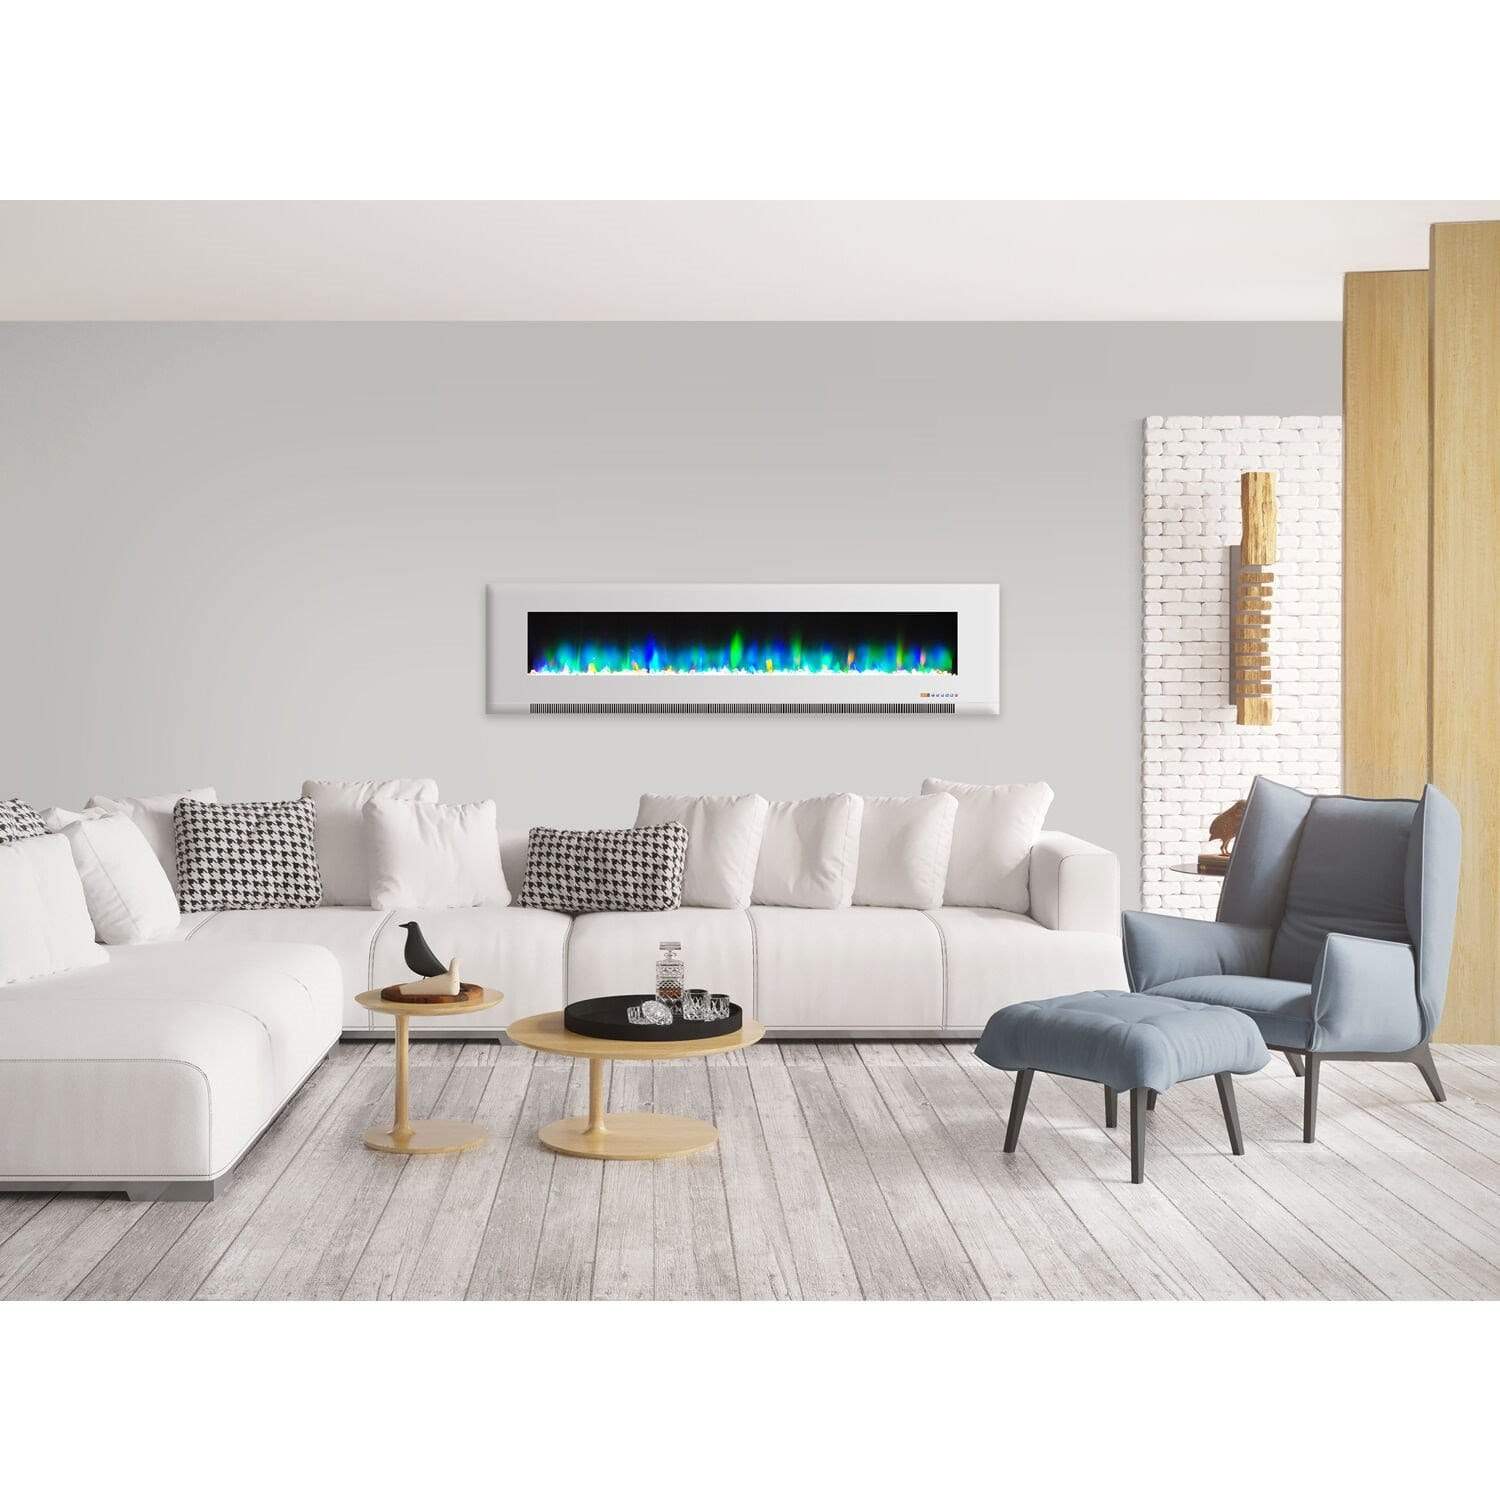 Cambridge Electric Wall-hung Fireplaces Cambridge 78 In. Wall-Mount Electric Fireplace in White with Multi-Color Flames and Crystal Rock Display